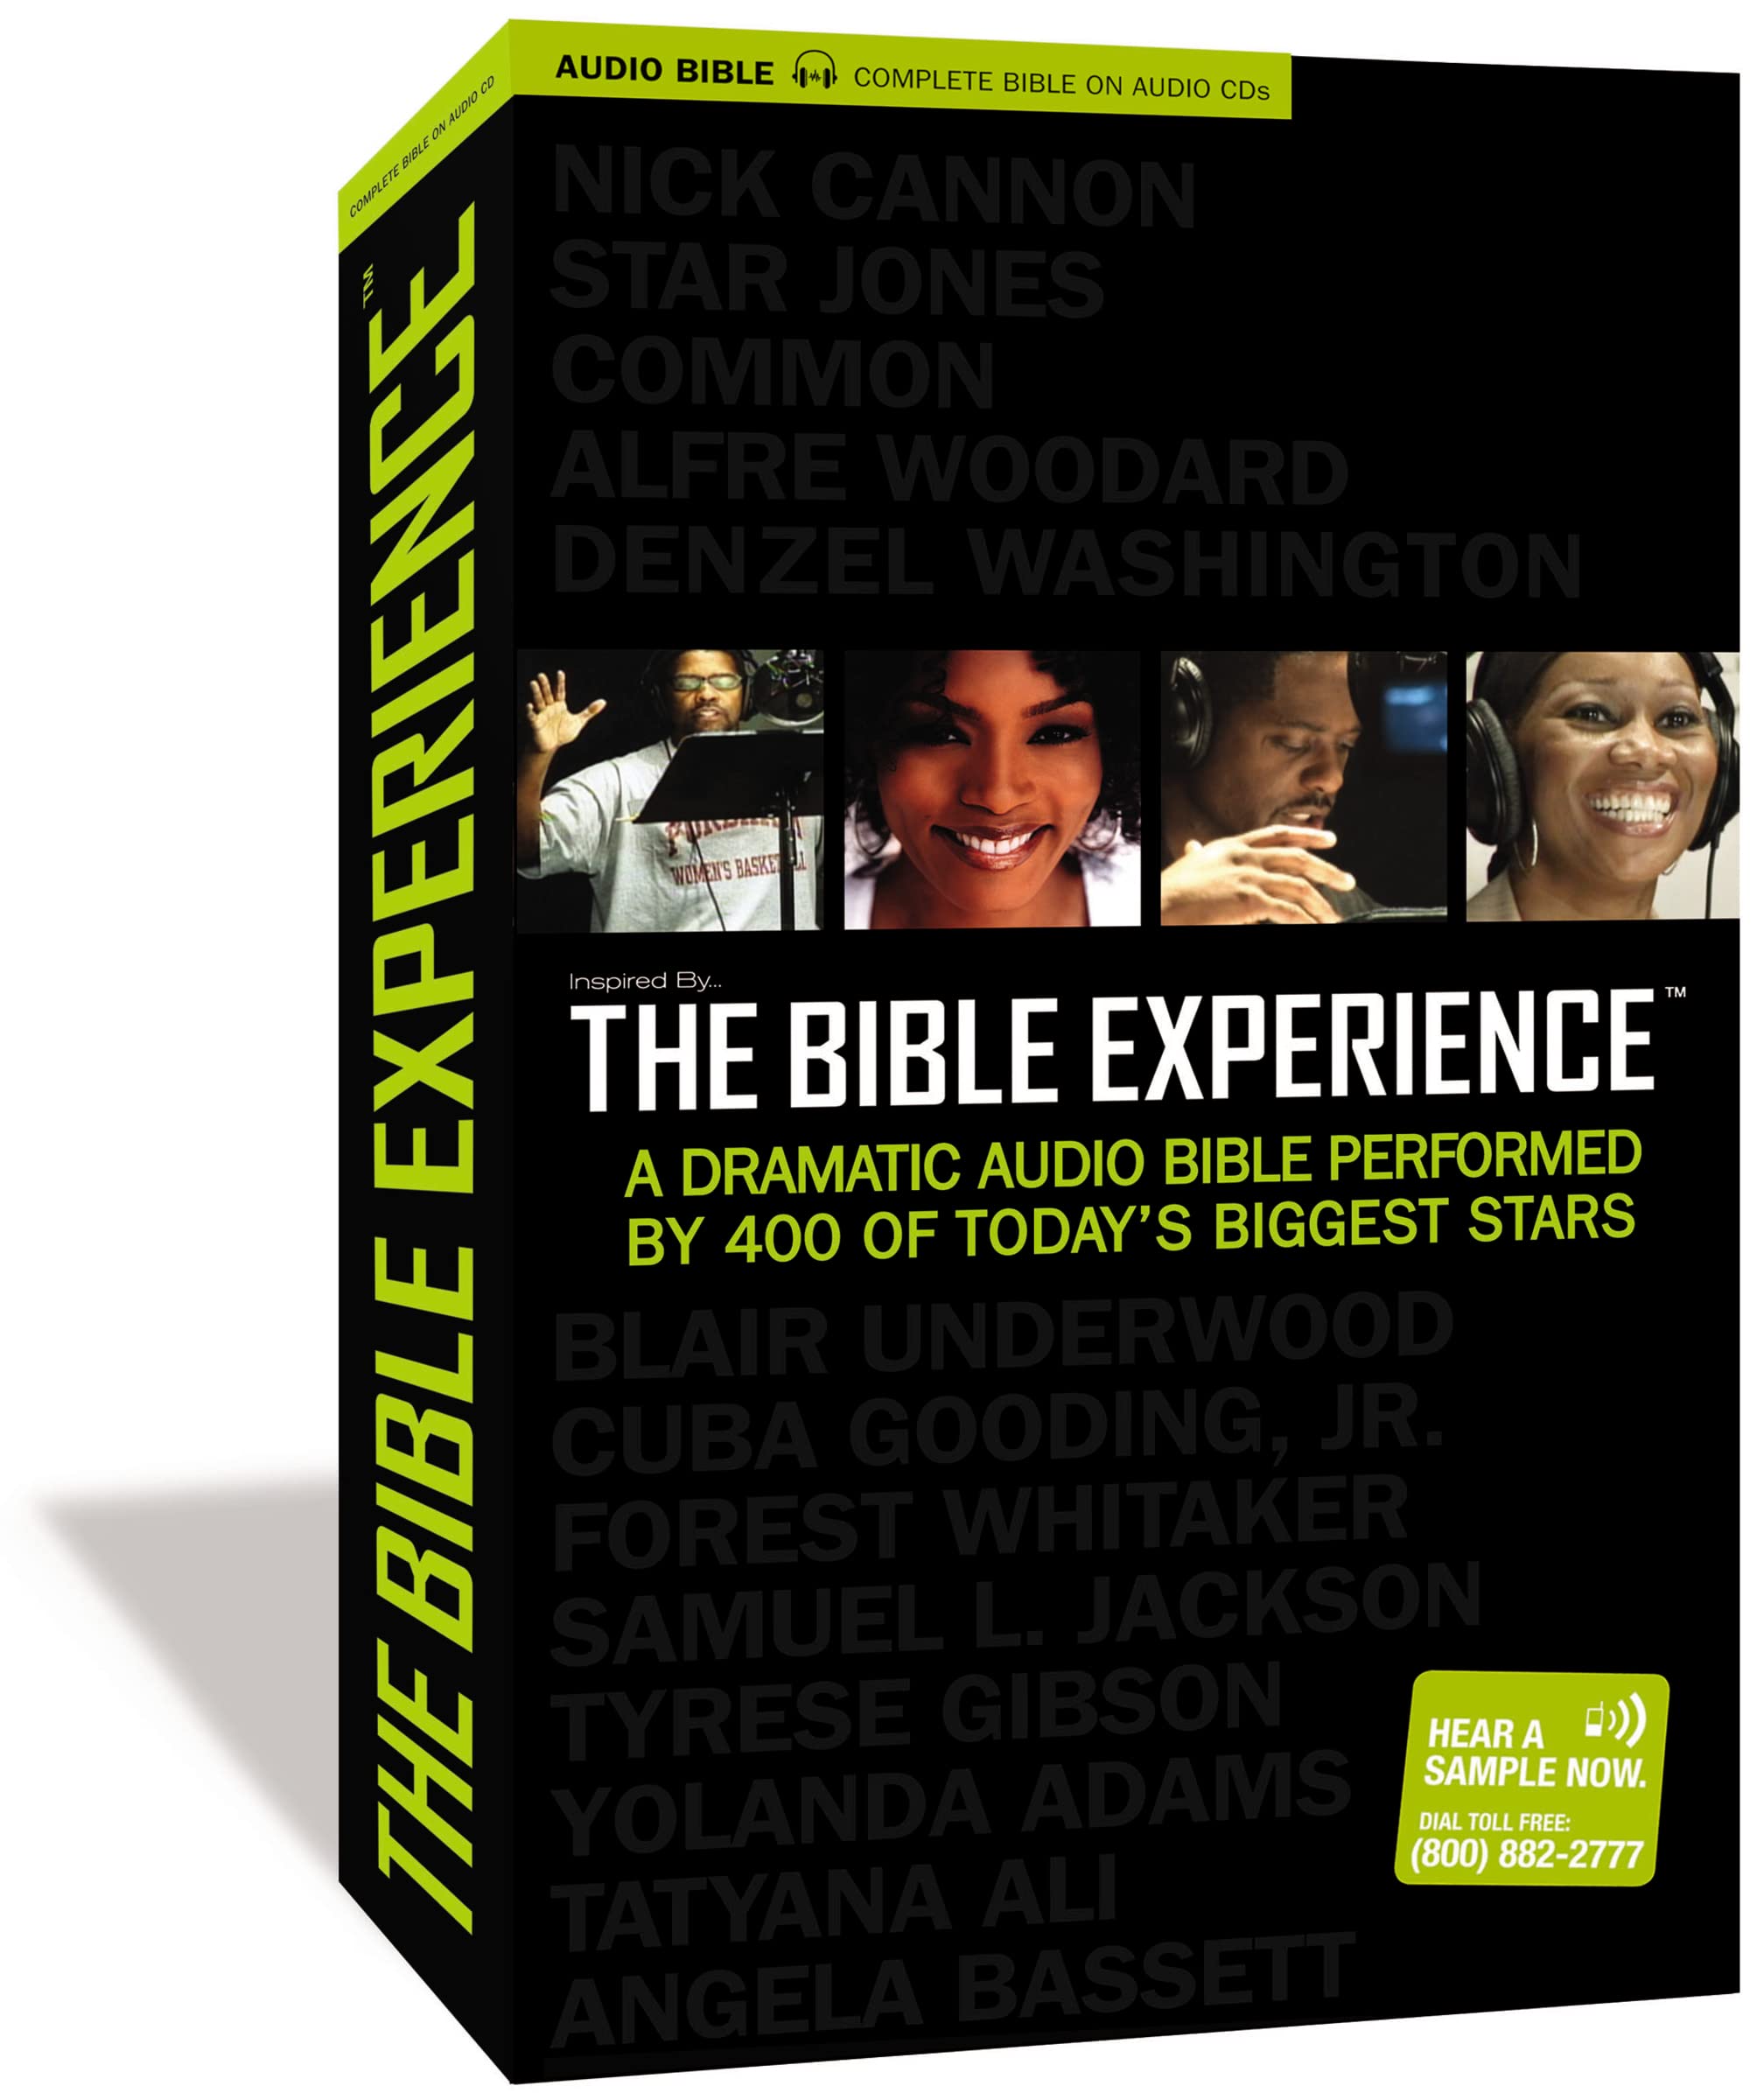 Inspired By . . . The Bible Experience: The Complete Bible, Audio CD: A Dramatic Audio Bible Performed by 400 of Today's Biggest Stars